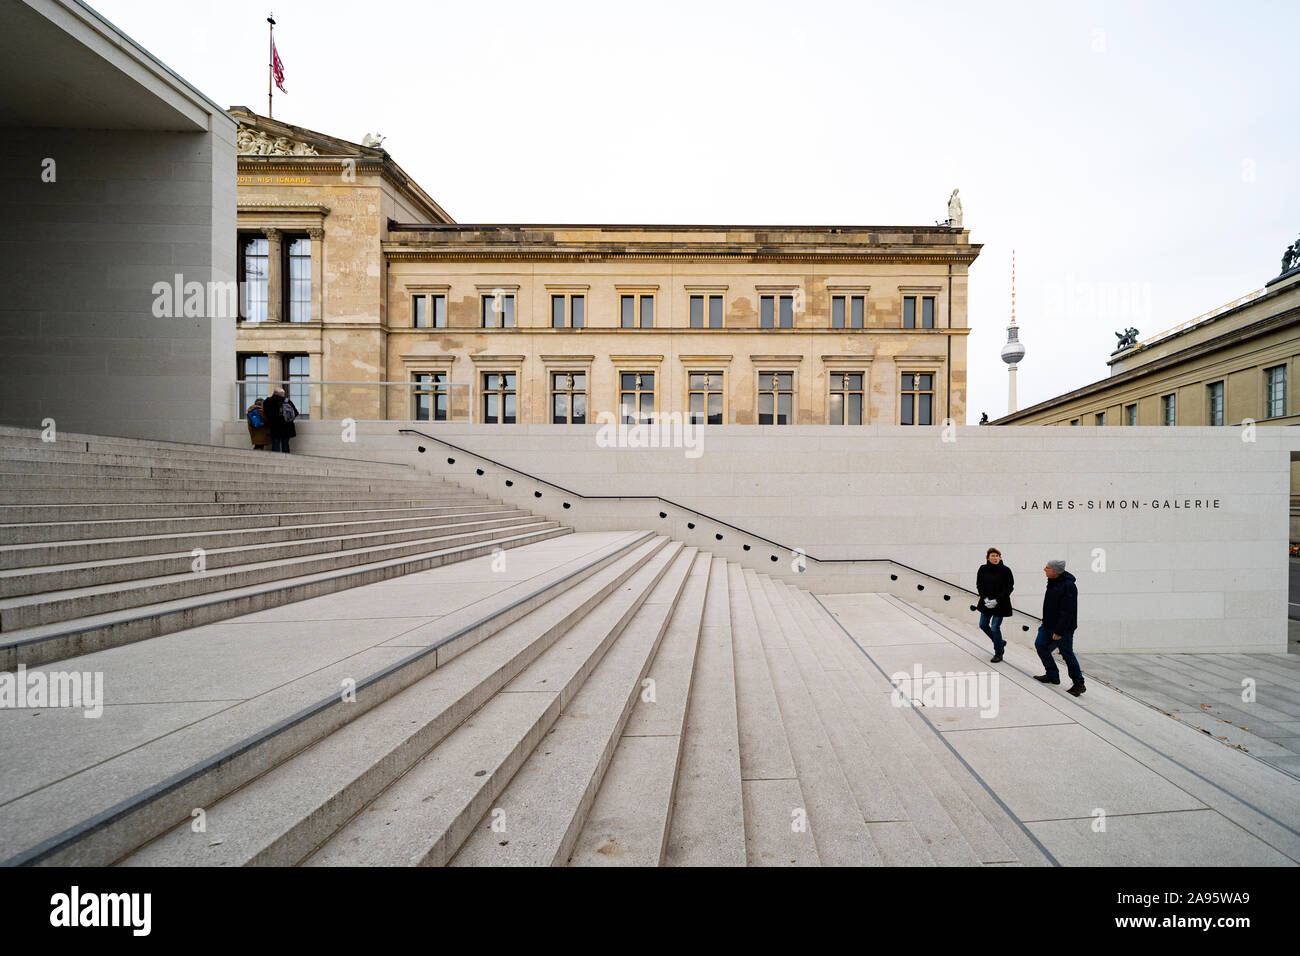 View of exterior of James Simon Galerie at Museum Island , Museumsinsel in Mitte Berlin, Germany, Architect David Chipperfield. Stock Photo